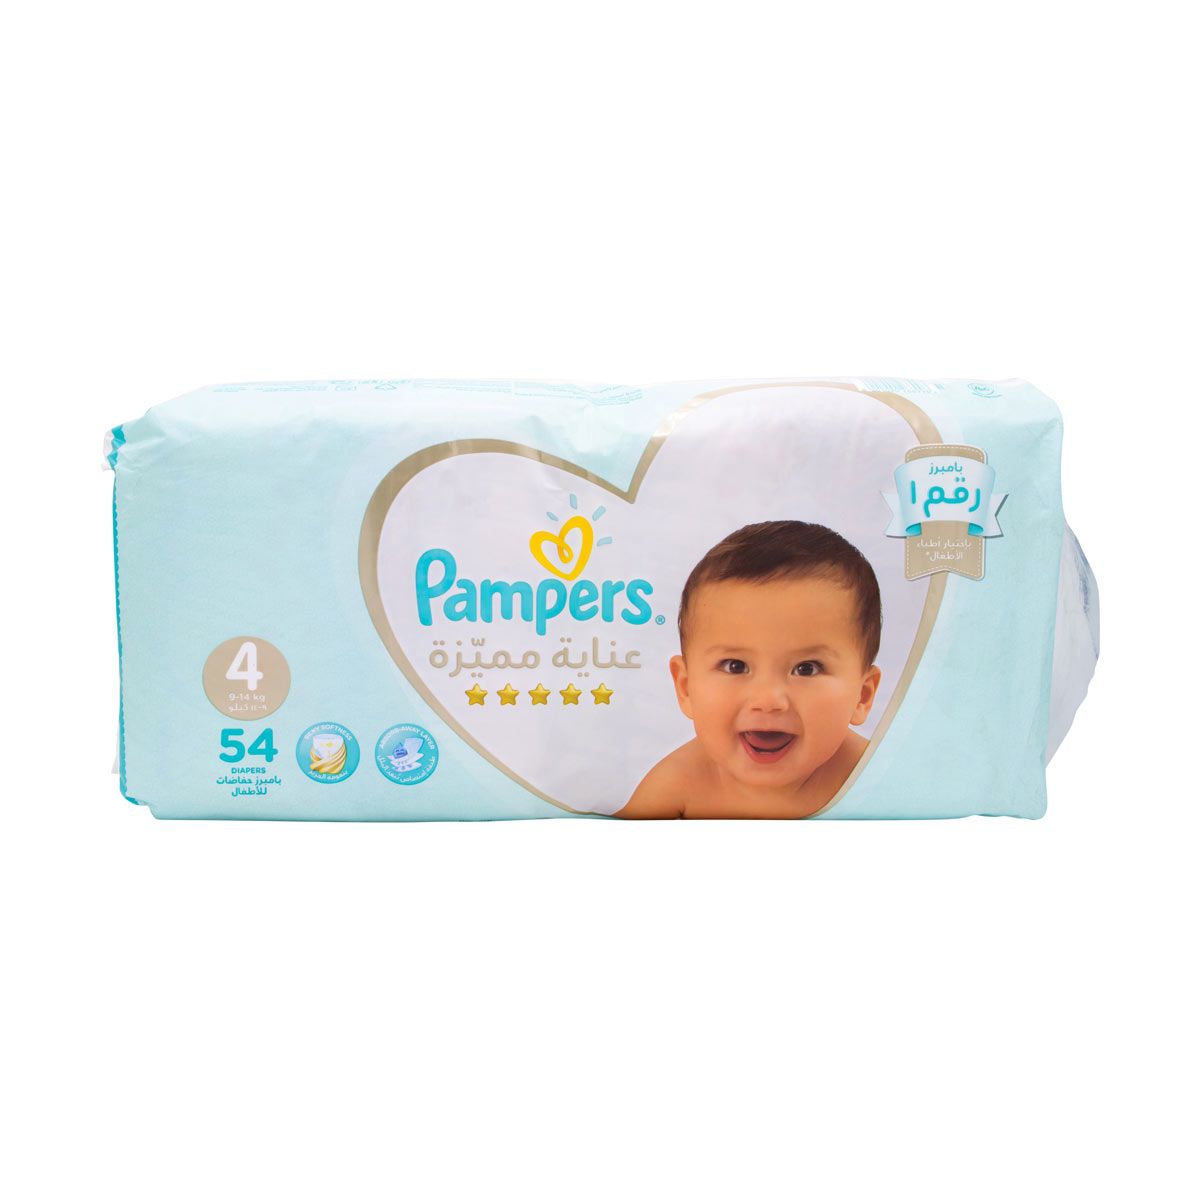 Premium Care Diapers Large Size 54 Diapers